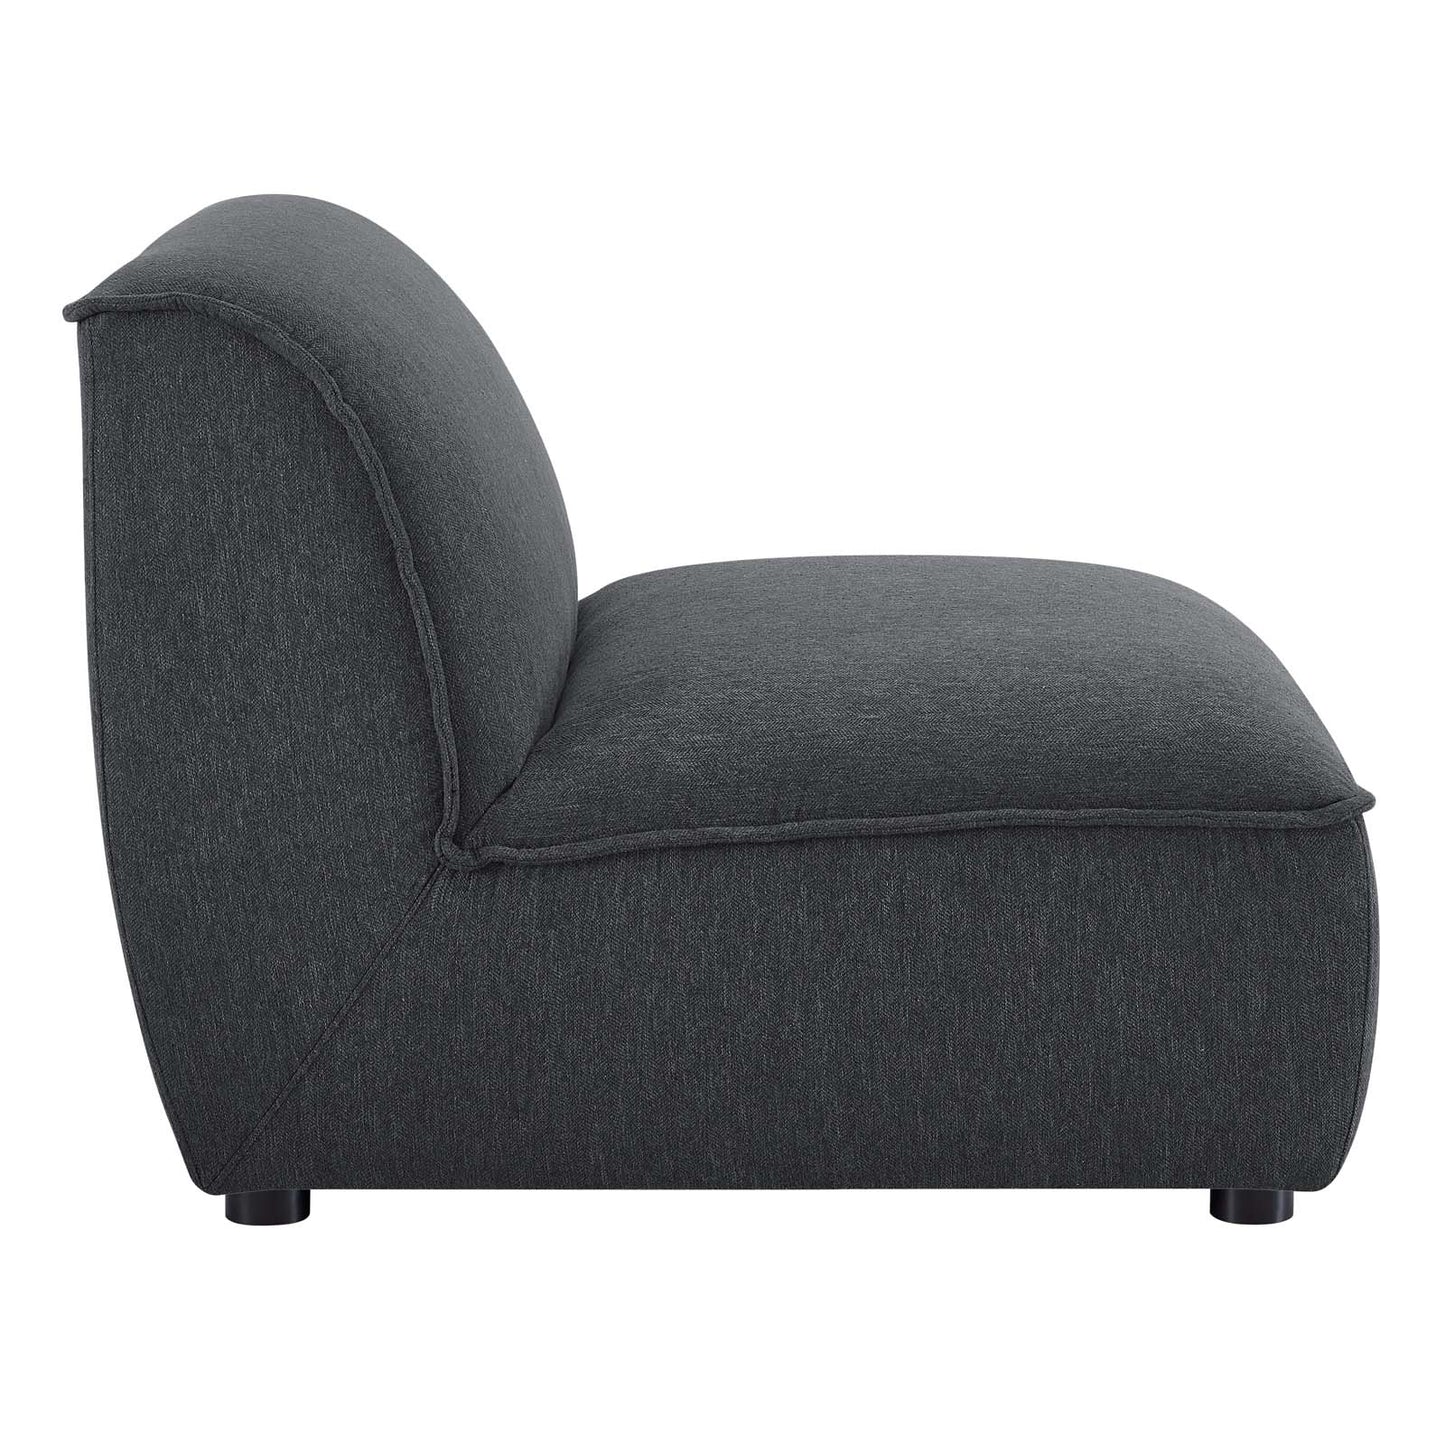 Comprise Armless Chair Charcoal EEI-4418-CHA